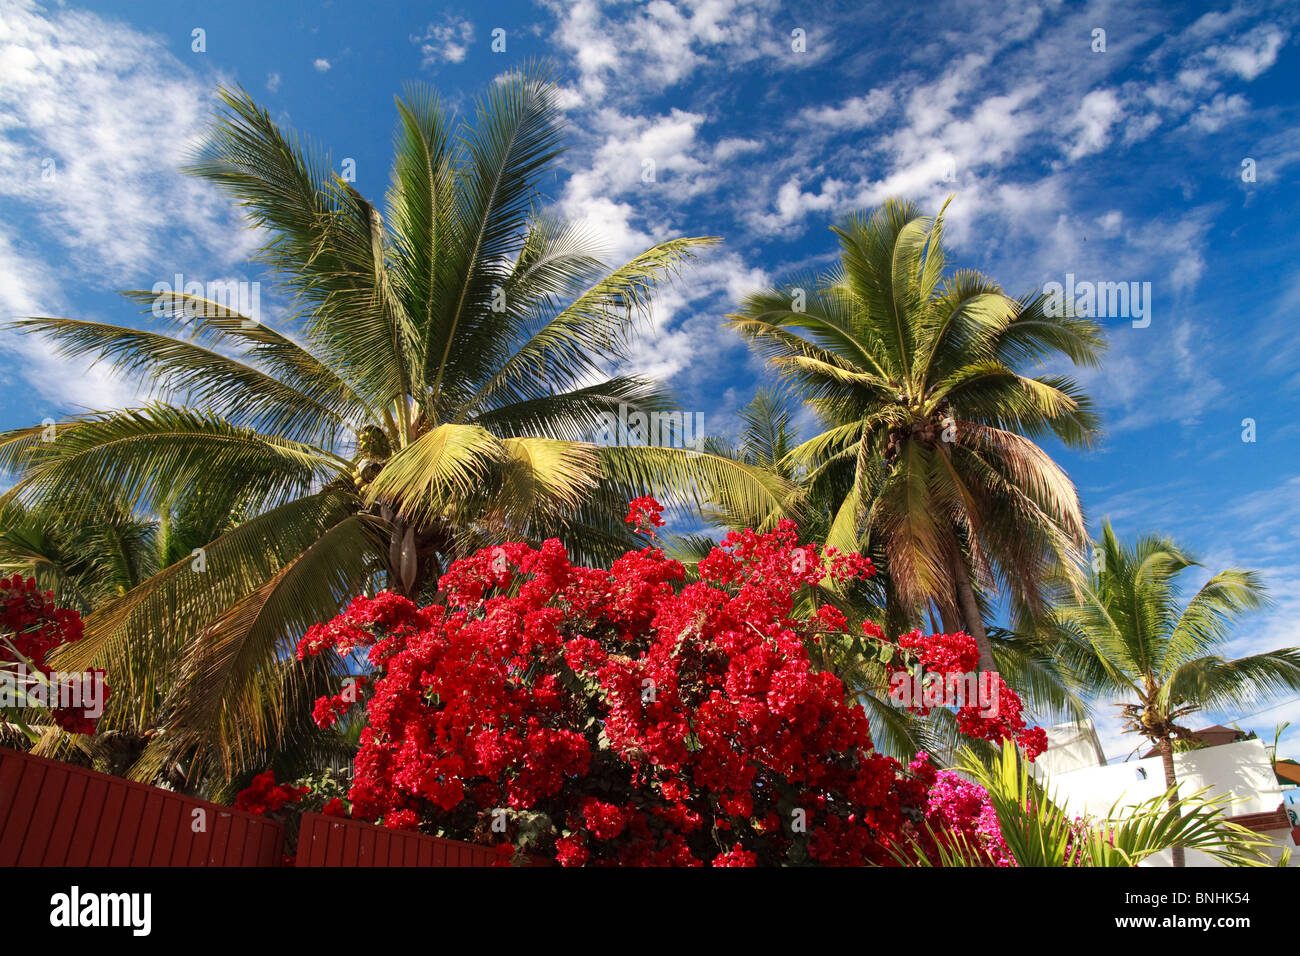 Red bougainvillea in bloom and palm trees against a cloud scattered blue sky in Rincon de Guayabitos, state of Nayarit, Mexico Stock Photo